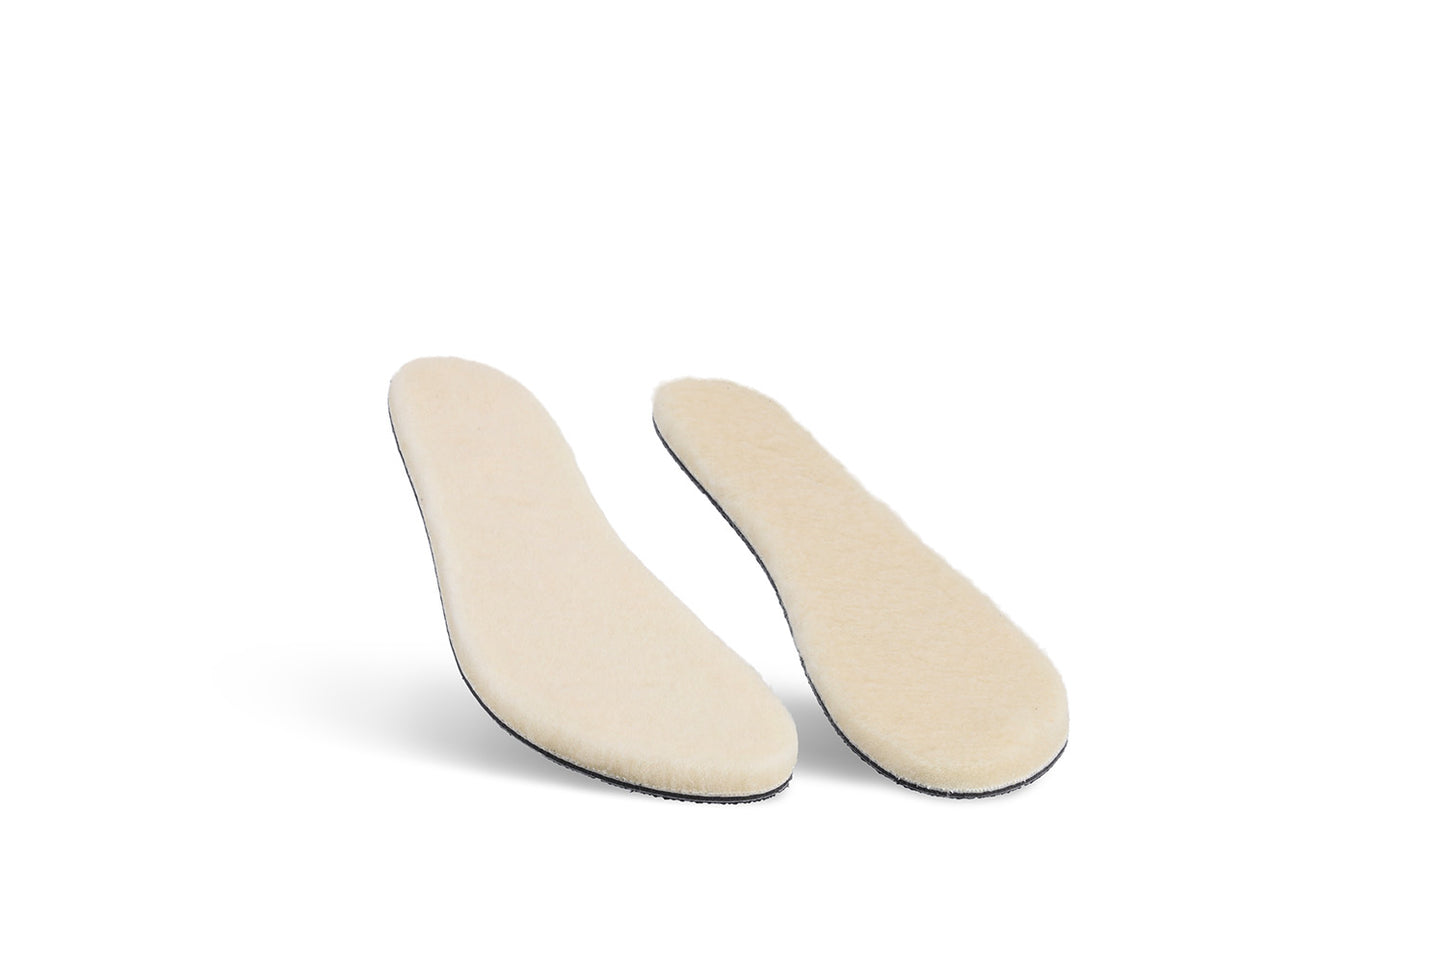 ThermoMax Wool Insole for the DeepGrip sole